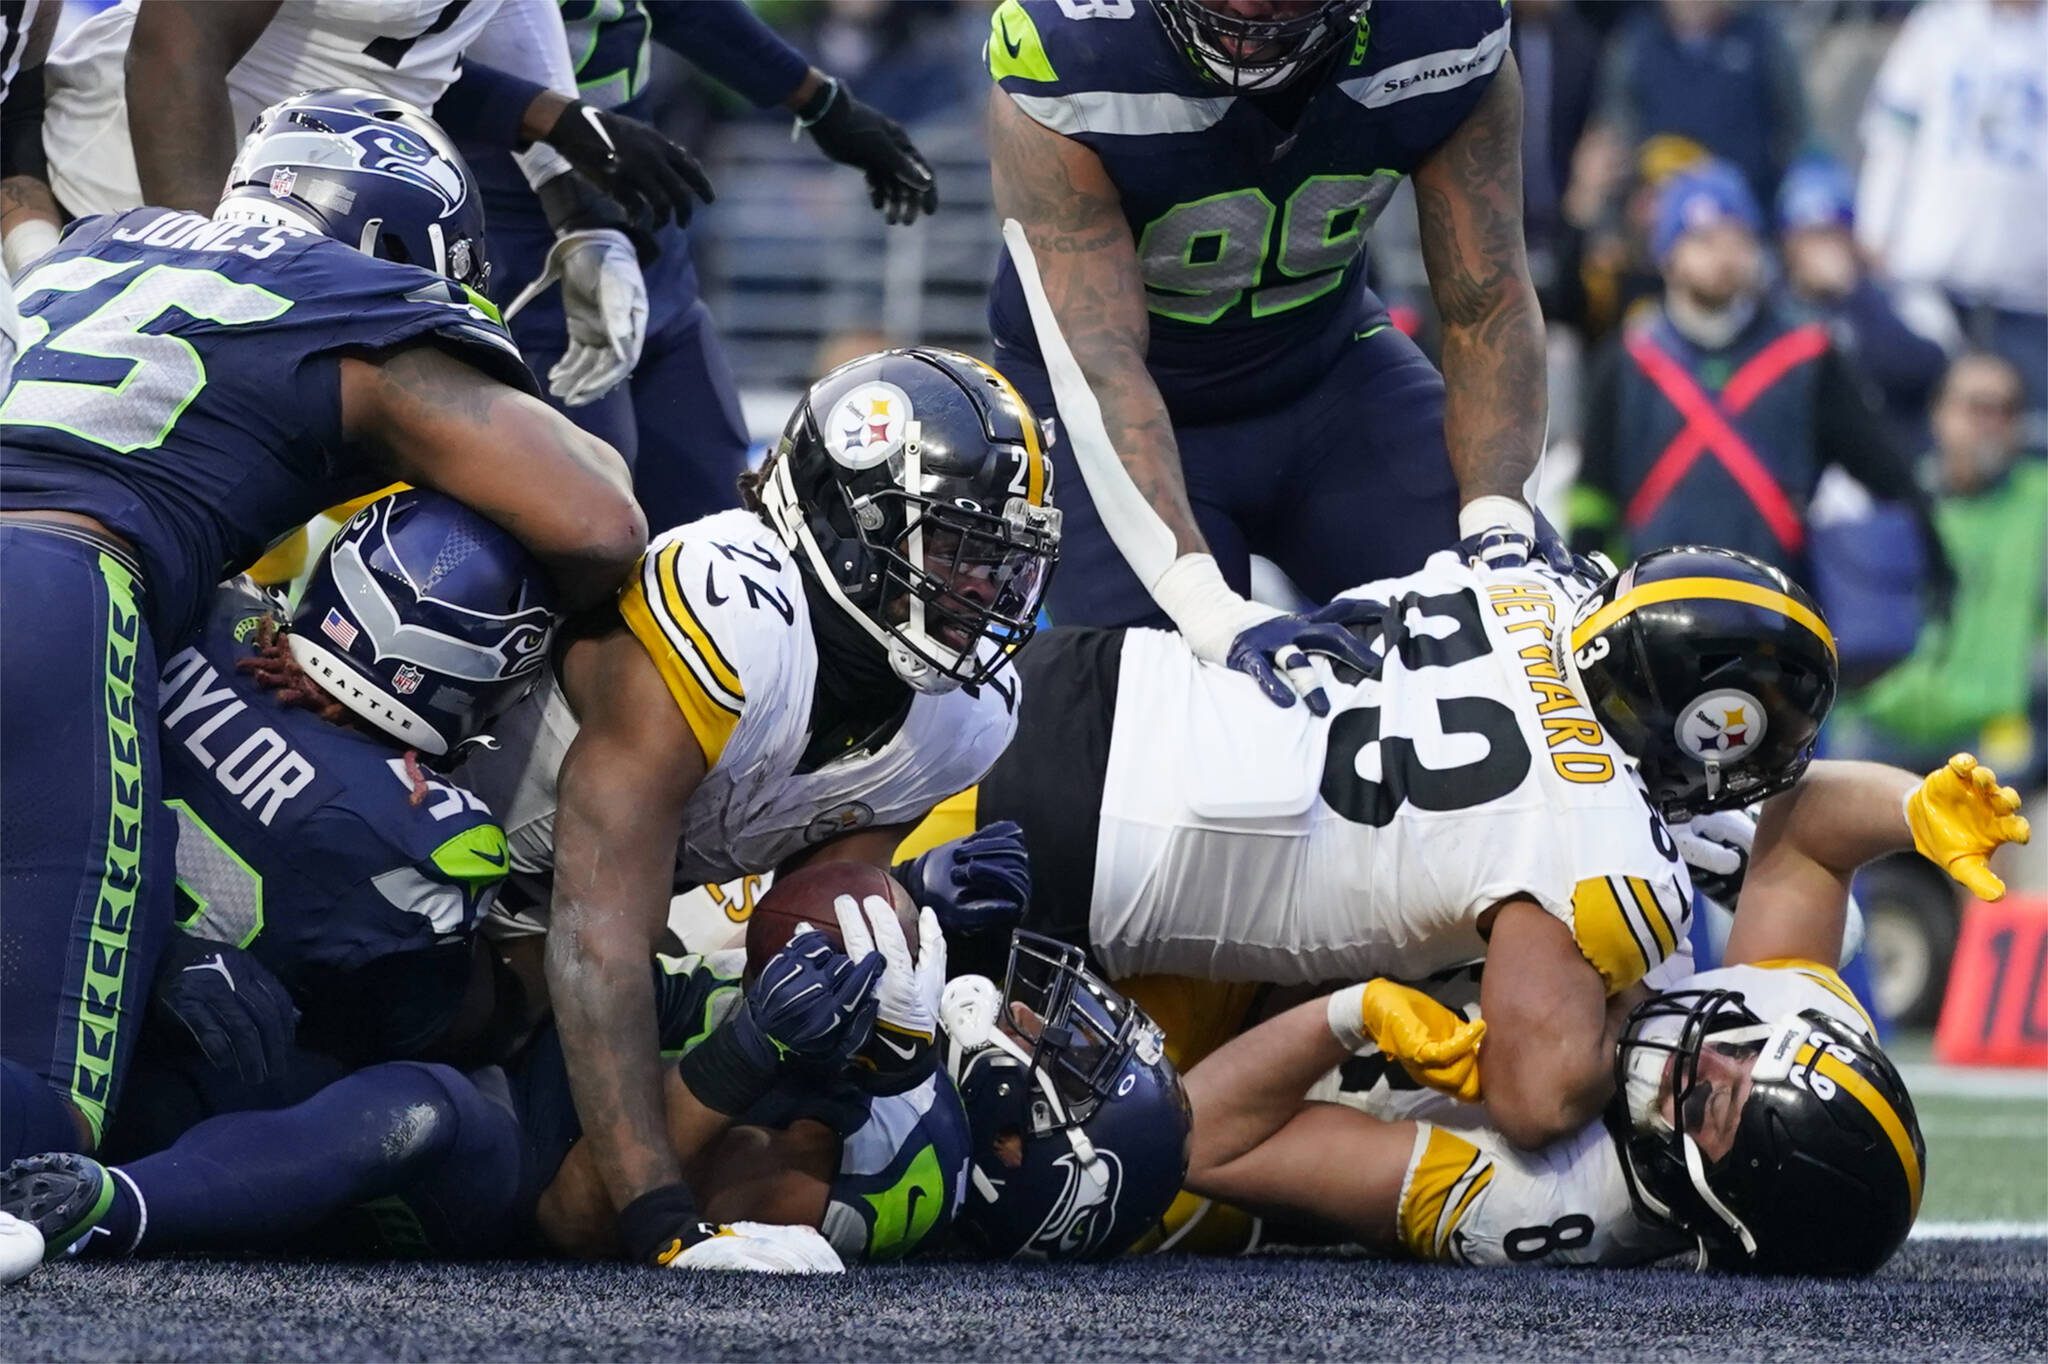 Pittsburgh Steelers running back Najee Harris (22) carries the Seattle Seahawks’ defense into the end zone in the second half of Sunday’s game in Seattle. (AP Photo/Lindsey Wasson)